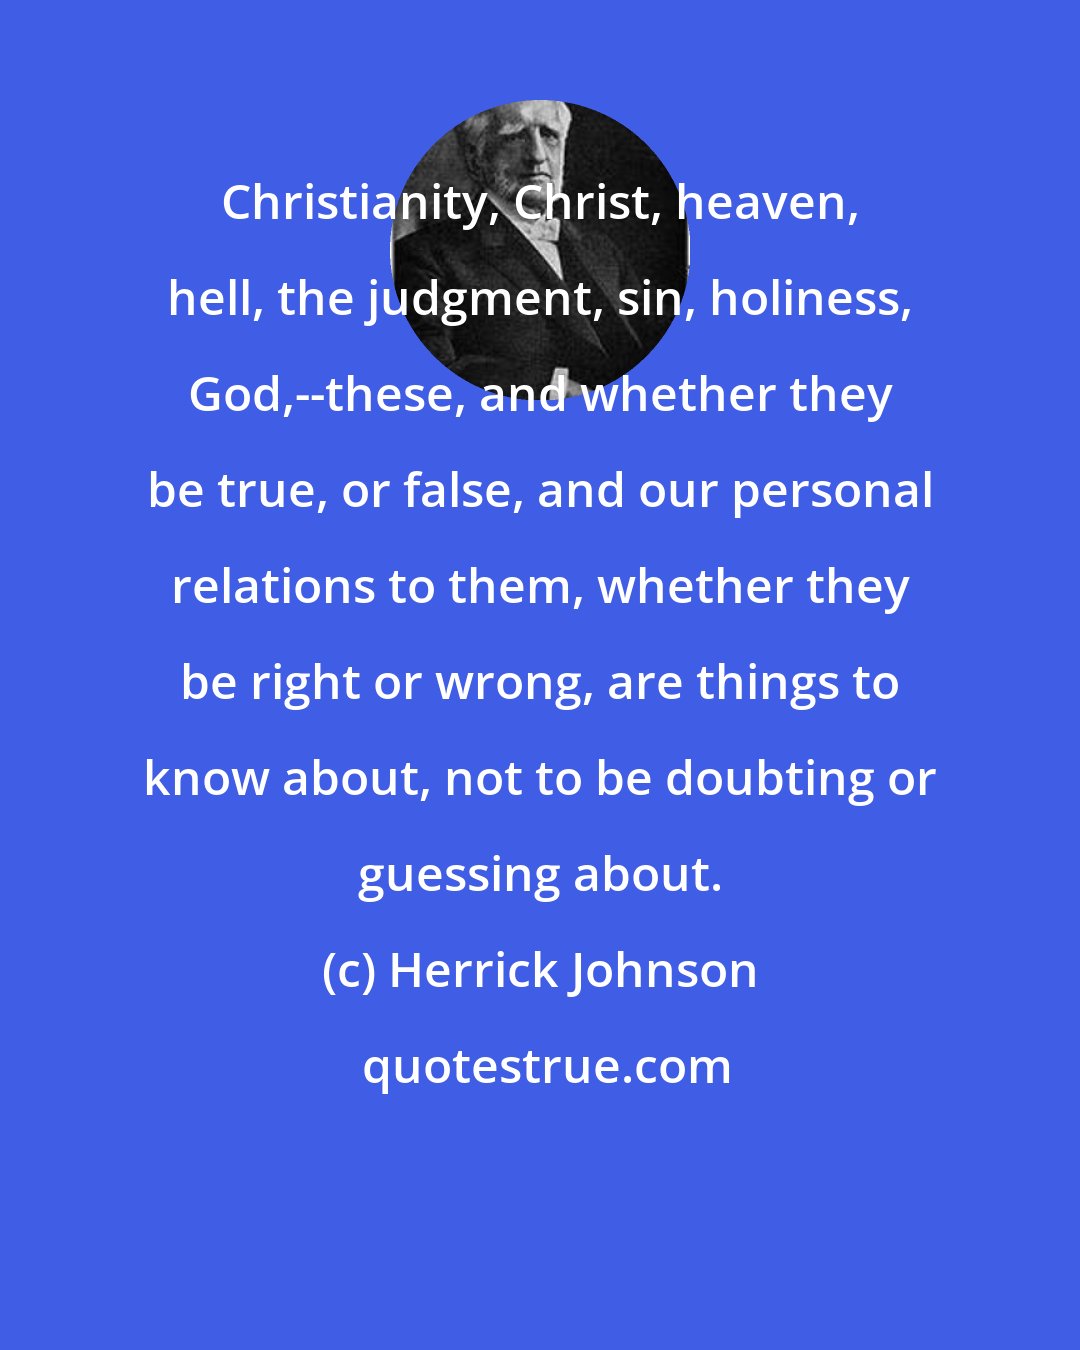 Herrick Johnson: Christianity, Christ, heaven, hell, the judgment, sin, holiness, God,--these, and whether they be true, or false, and our personal relations to them, whether they be right or wrong, are things to know about, not to be doubting or guessing about.